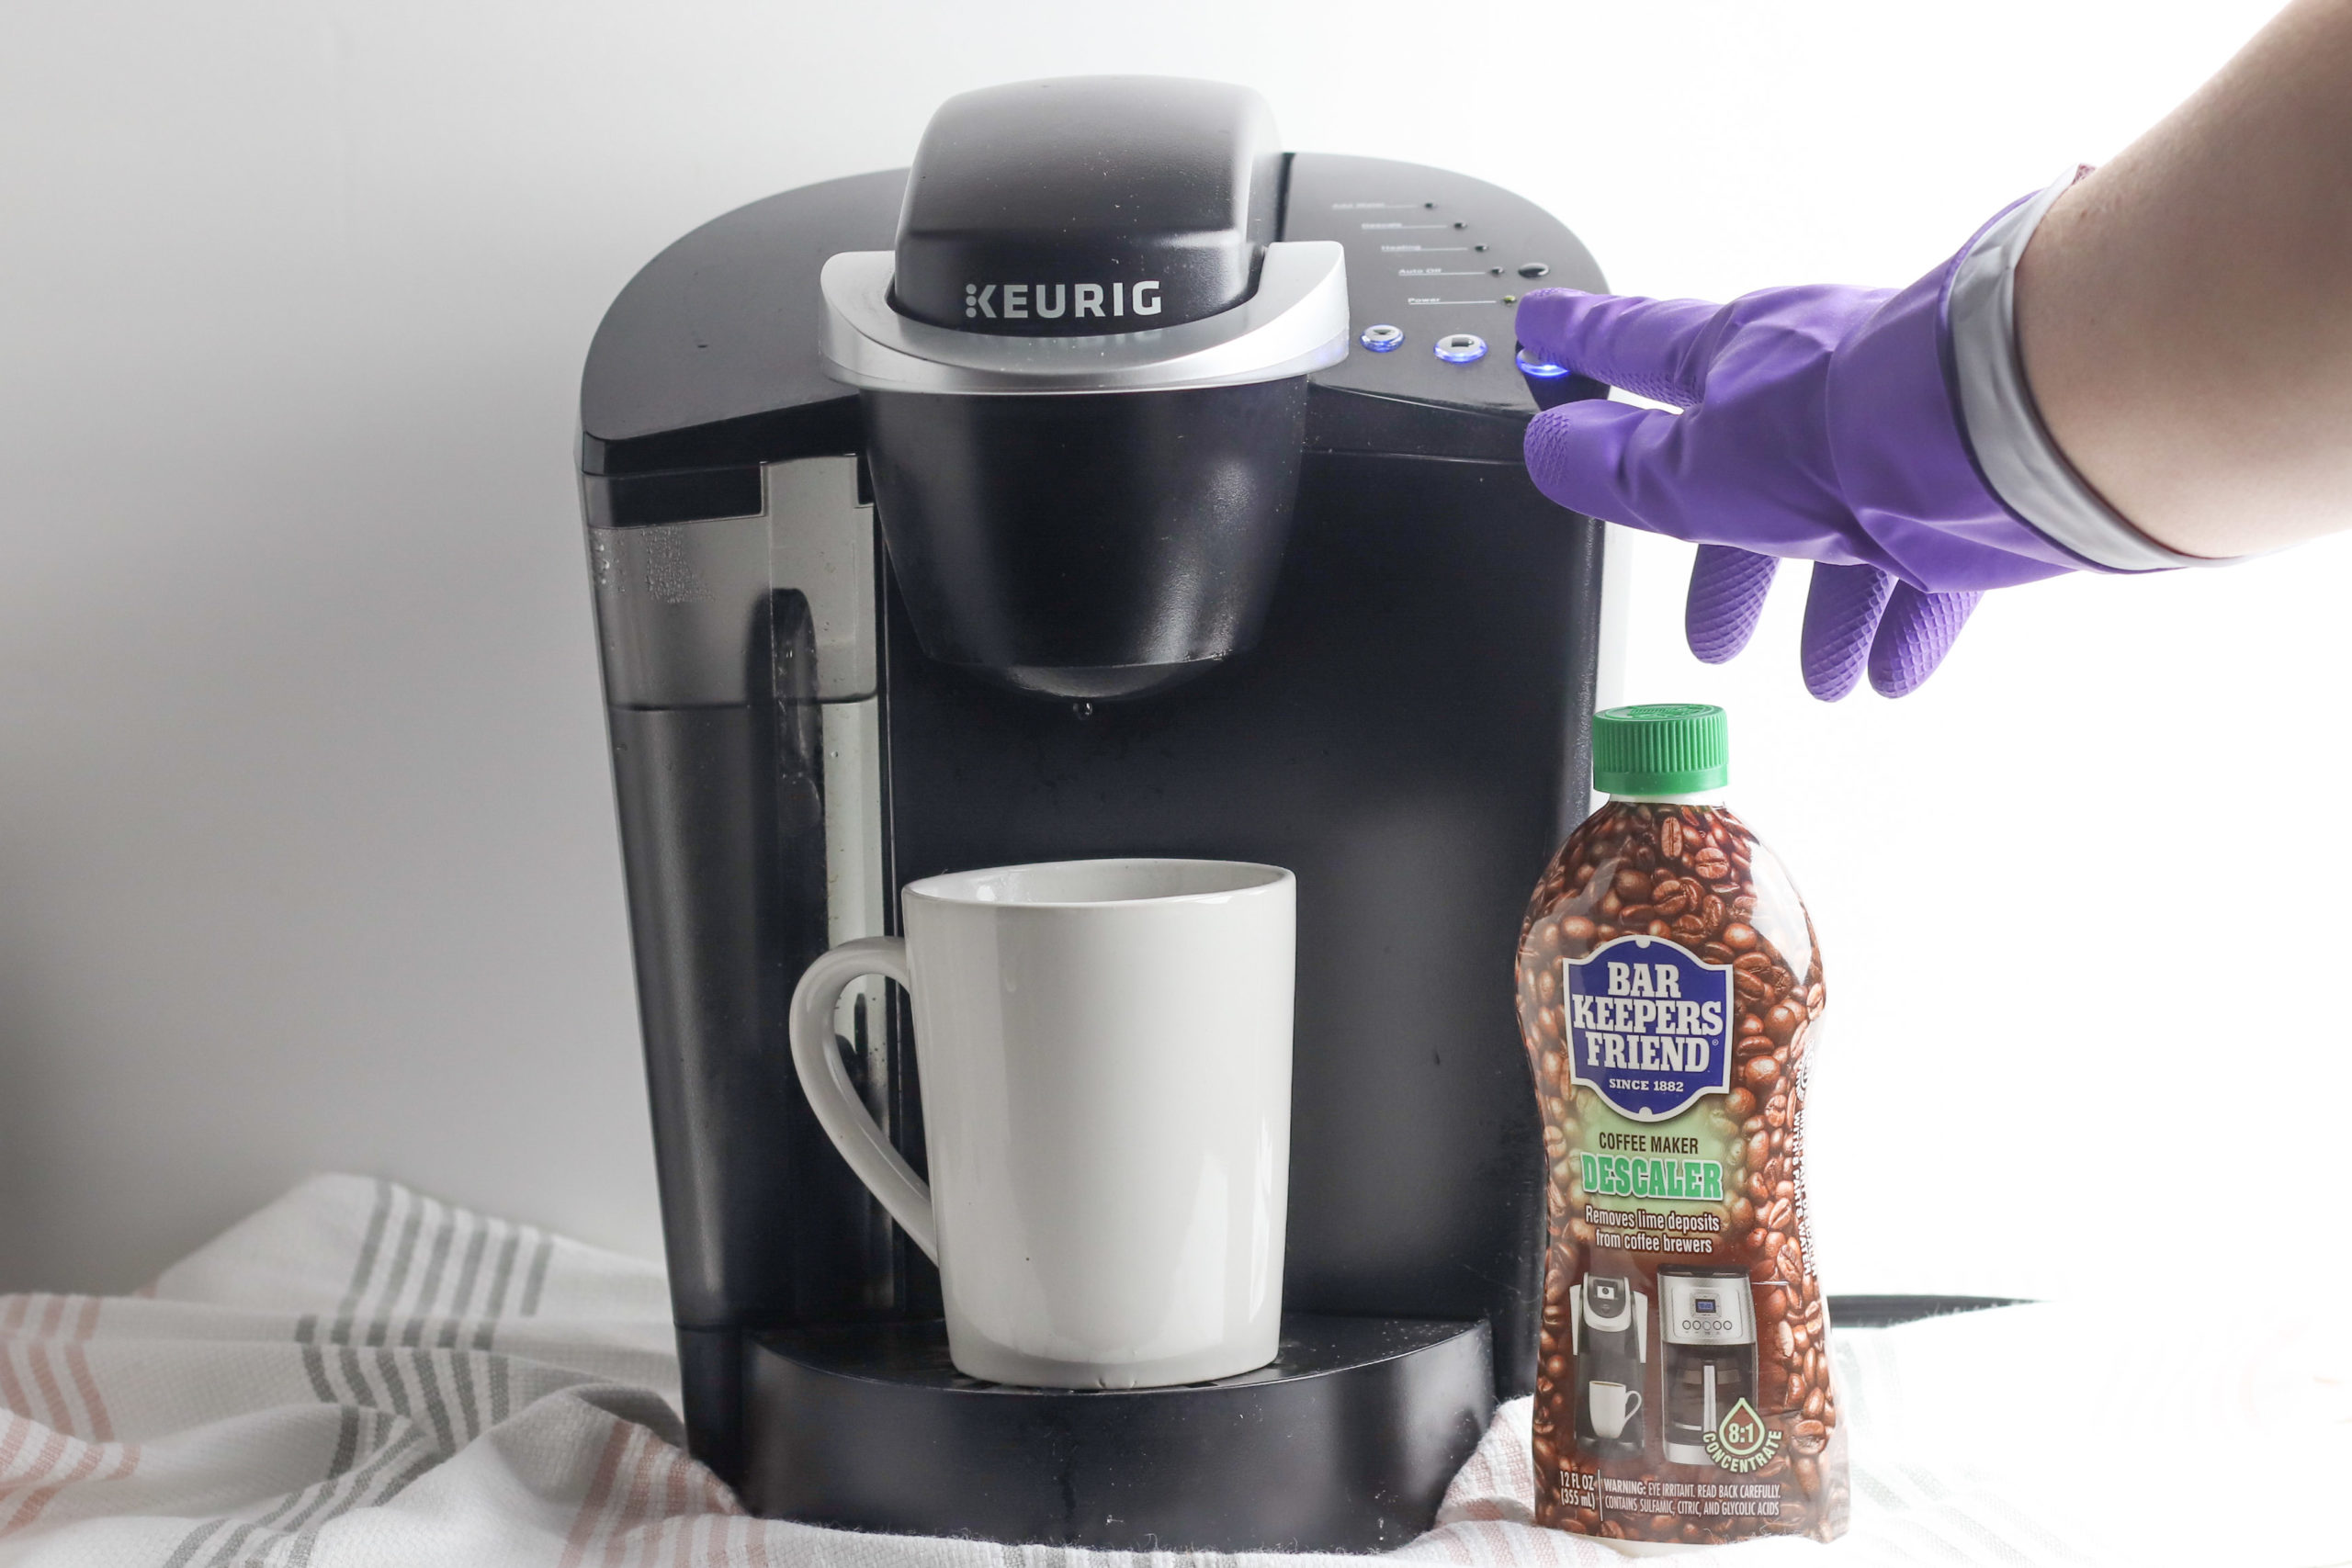 How much vinegar should i use to clean my keurig How To Clean And Descale A Keurig Without Vinegar